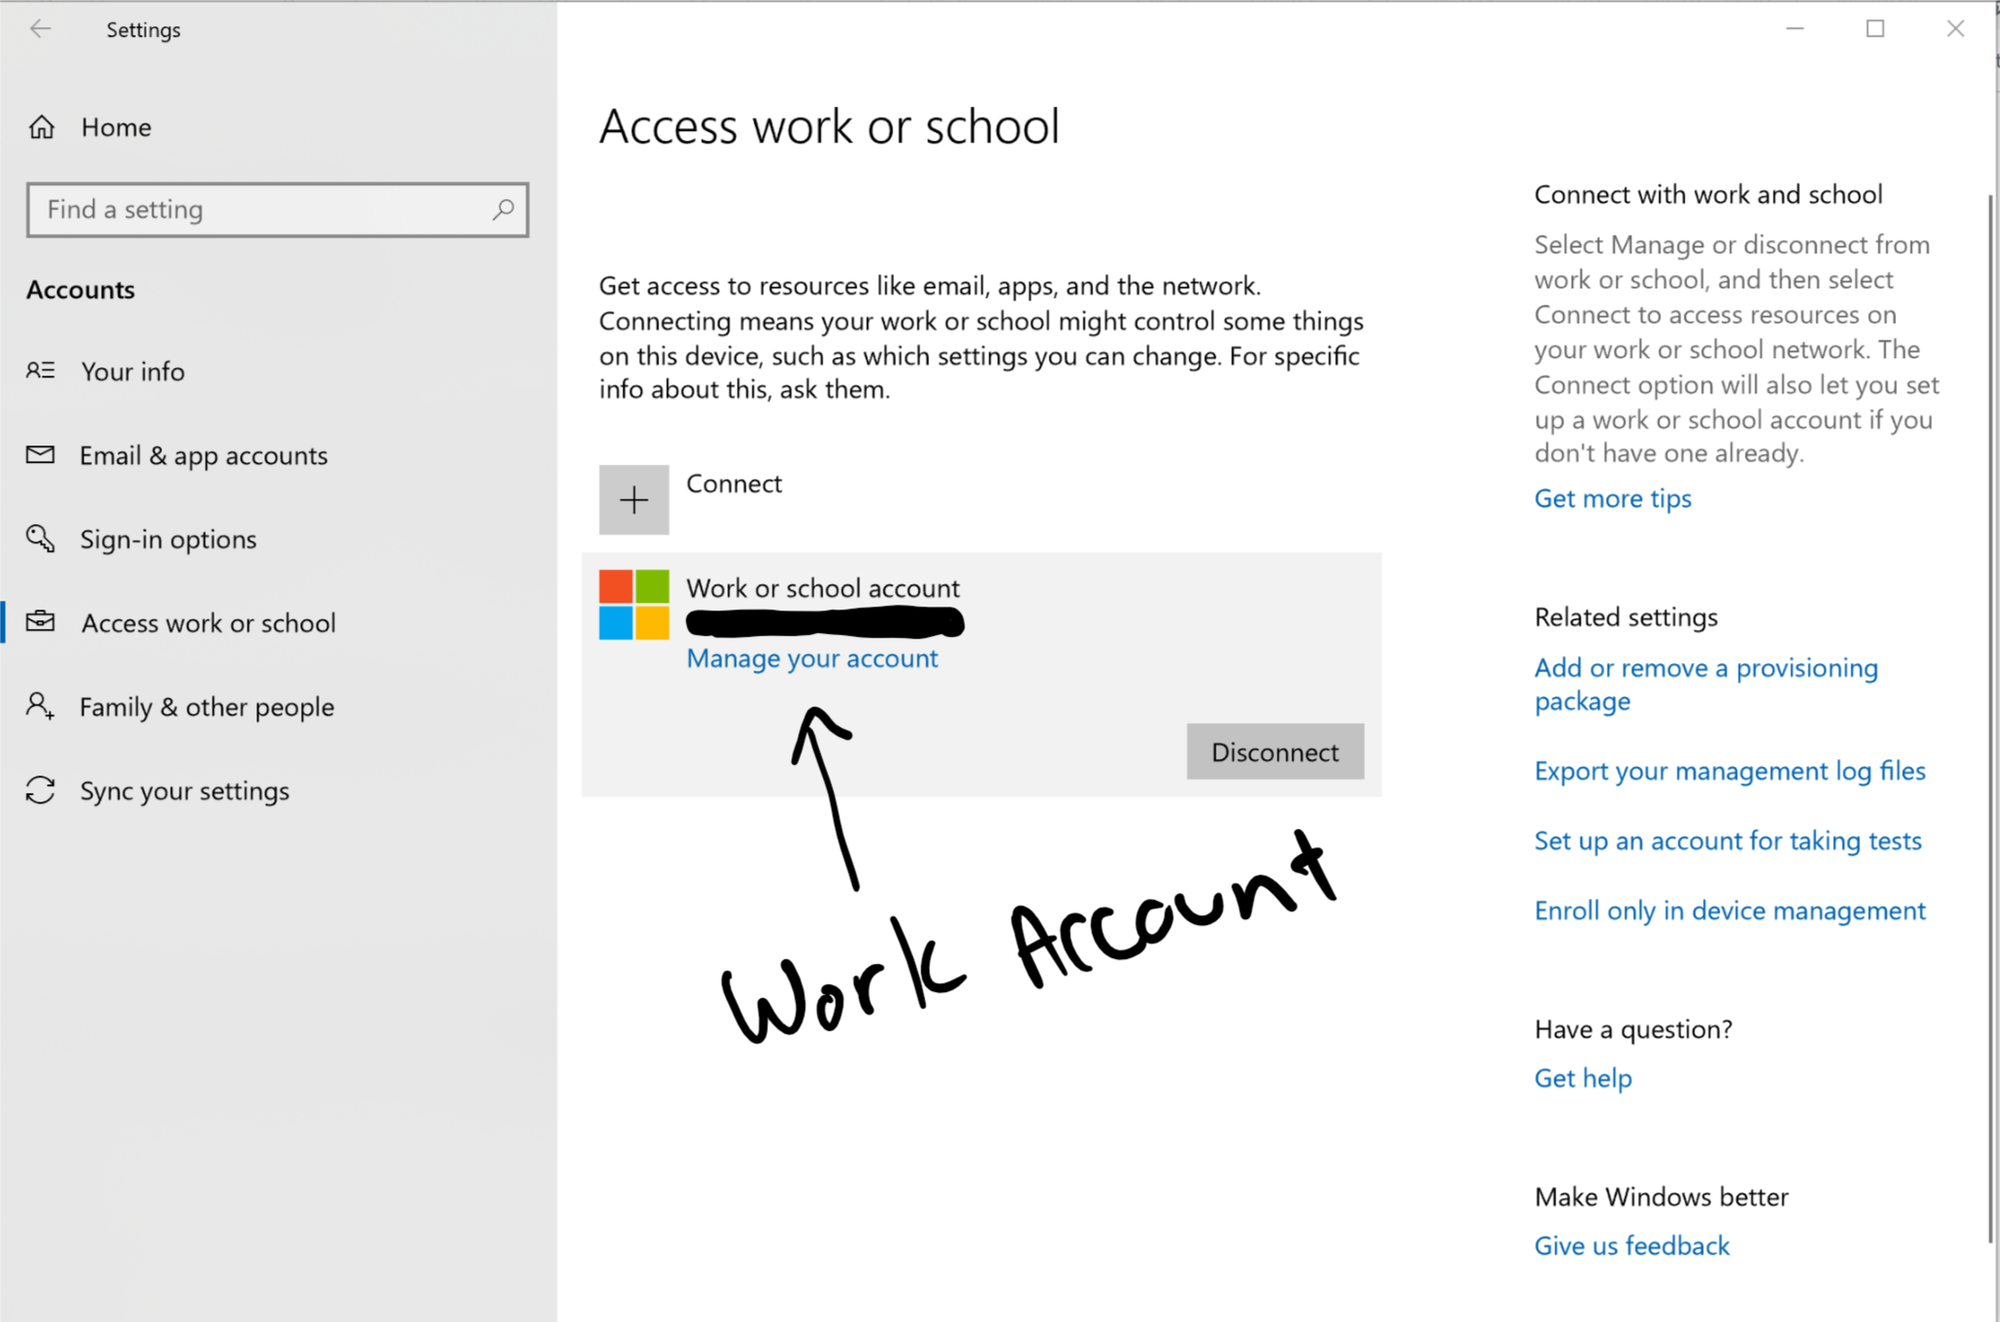 What permissions are granted for Access work or school acccount in Windows 10 677384ea-056f-49f1-b942-97252d6883b4?upload=true.png